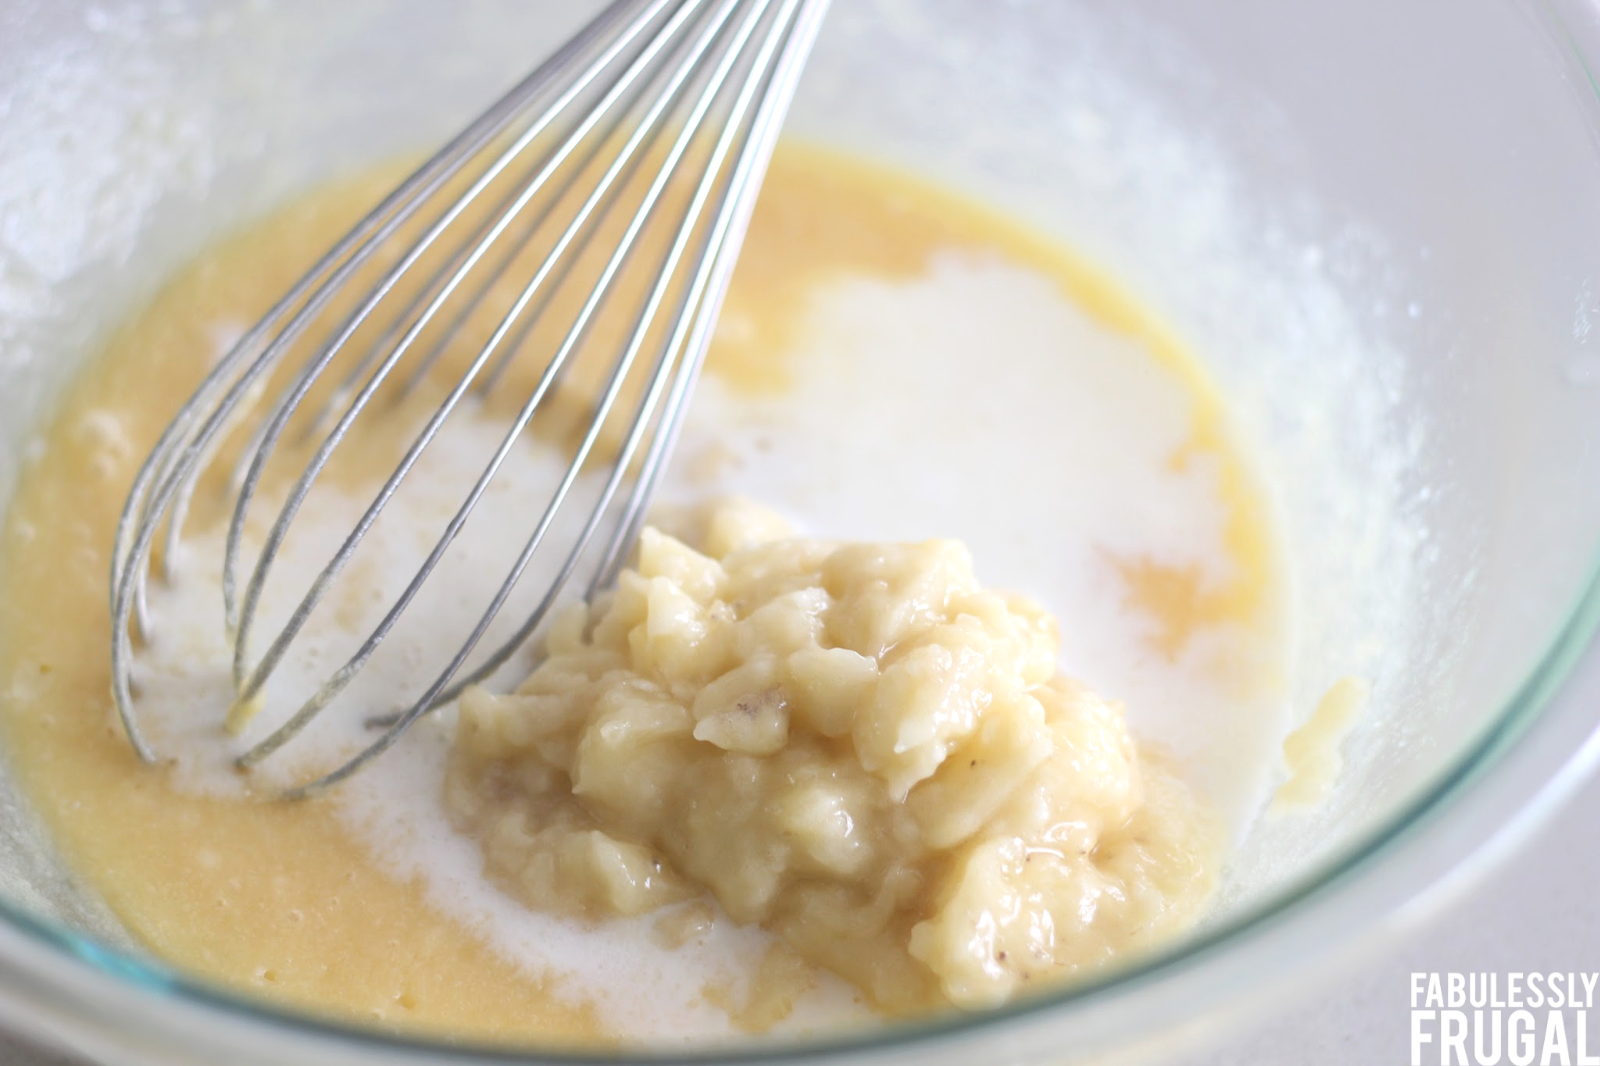 Mixing milk, mashed banana, and other ingredients